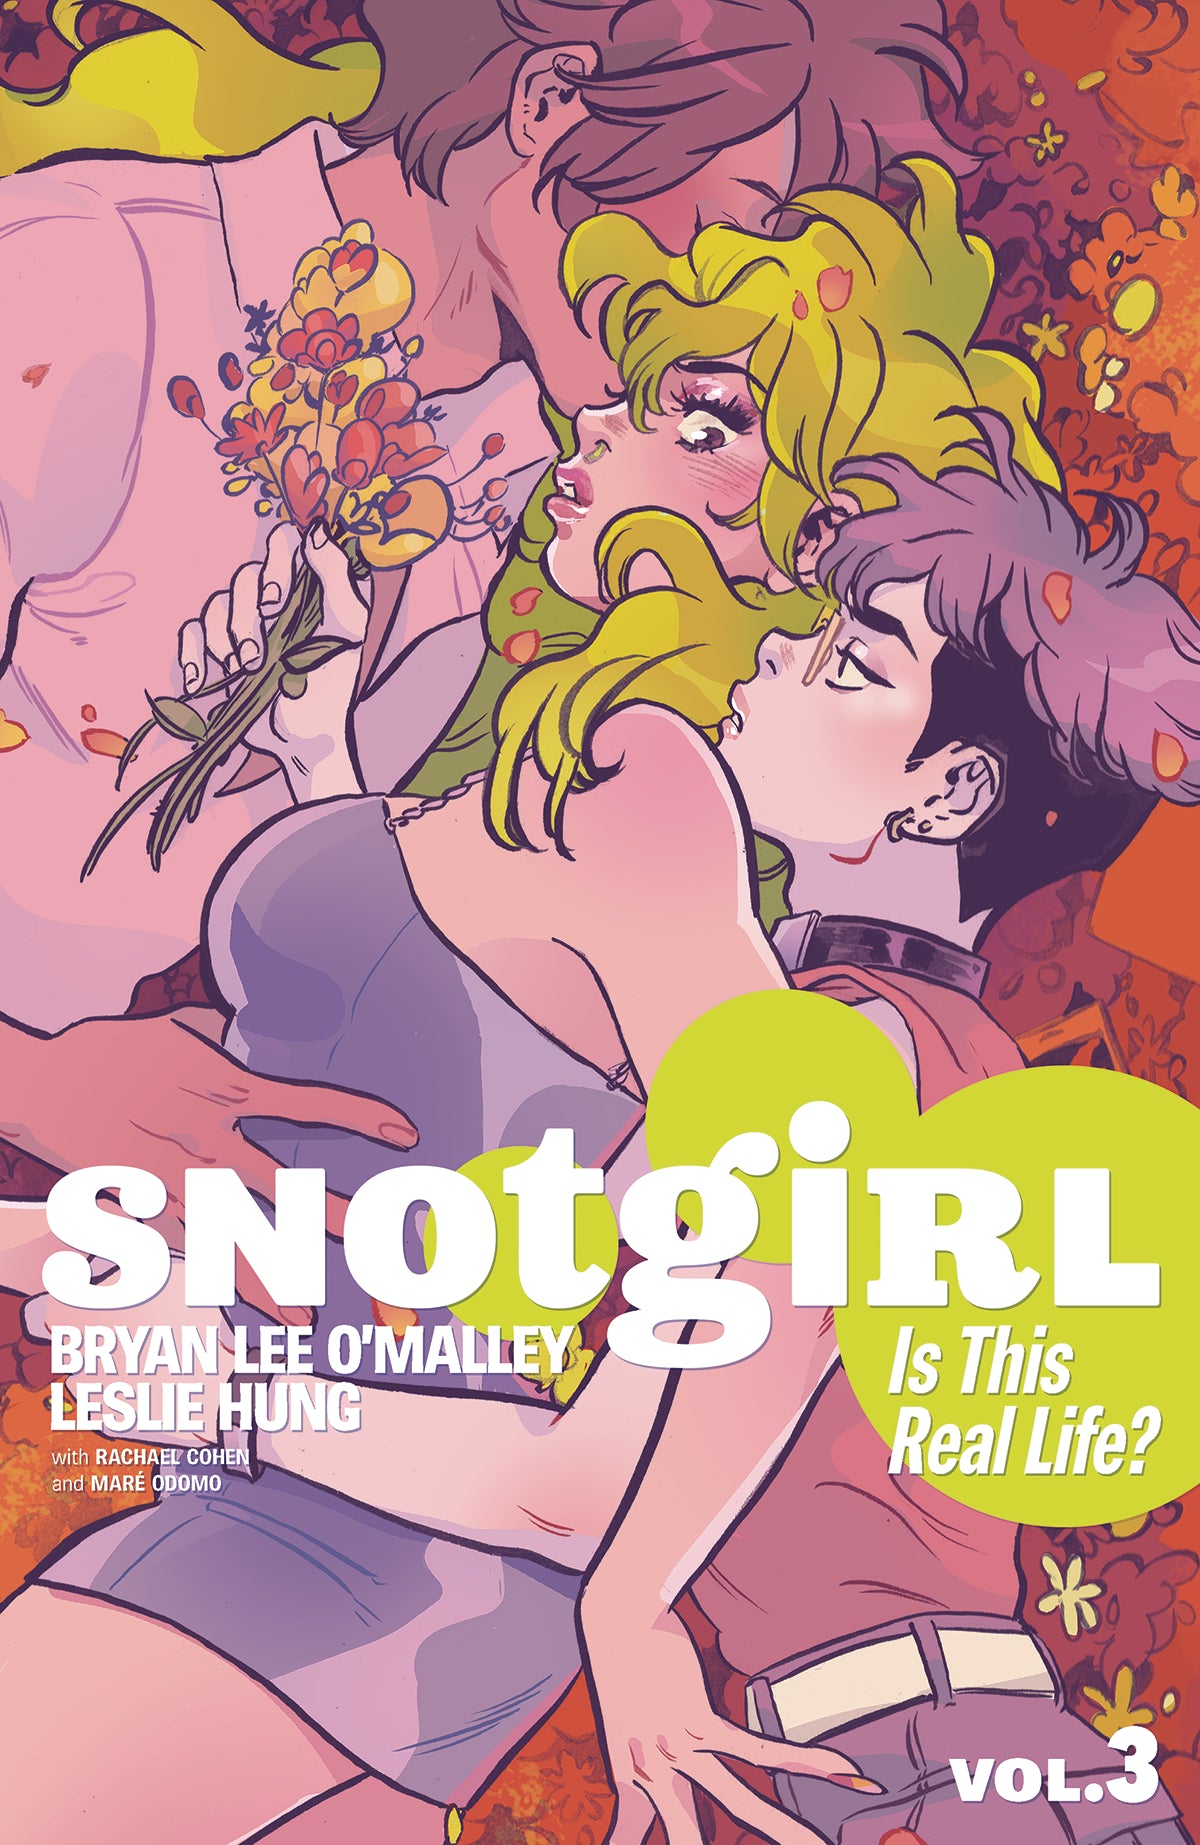 SNOTGIRL VOLUME 03 IS THIS REAL LIFE